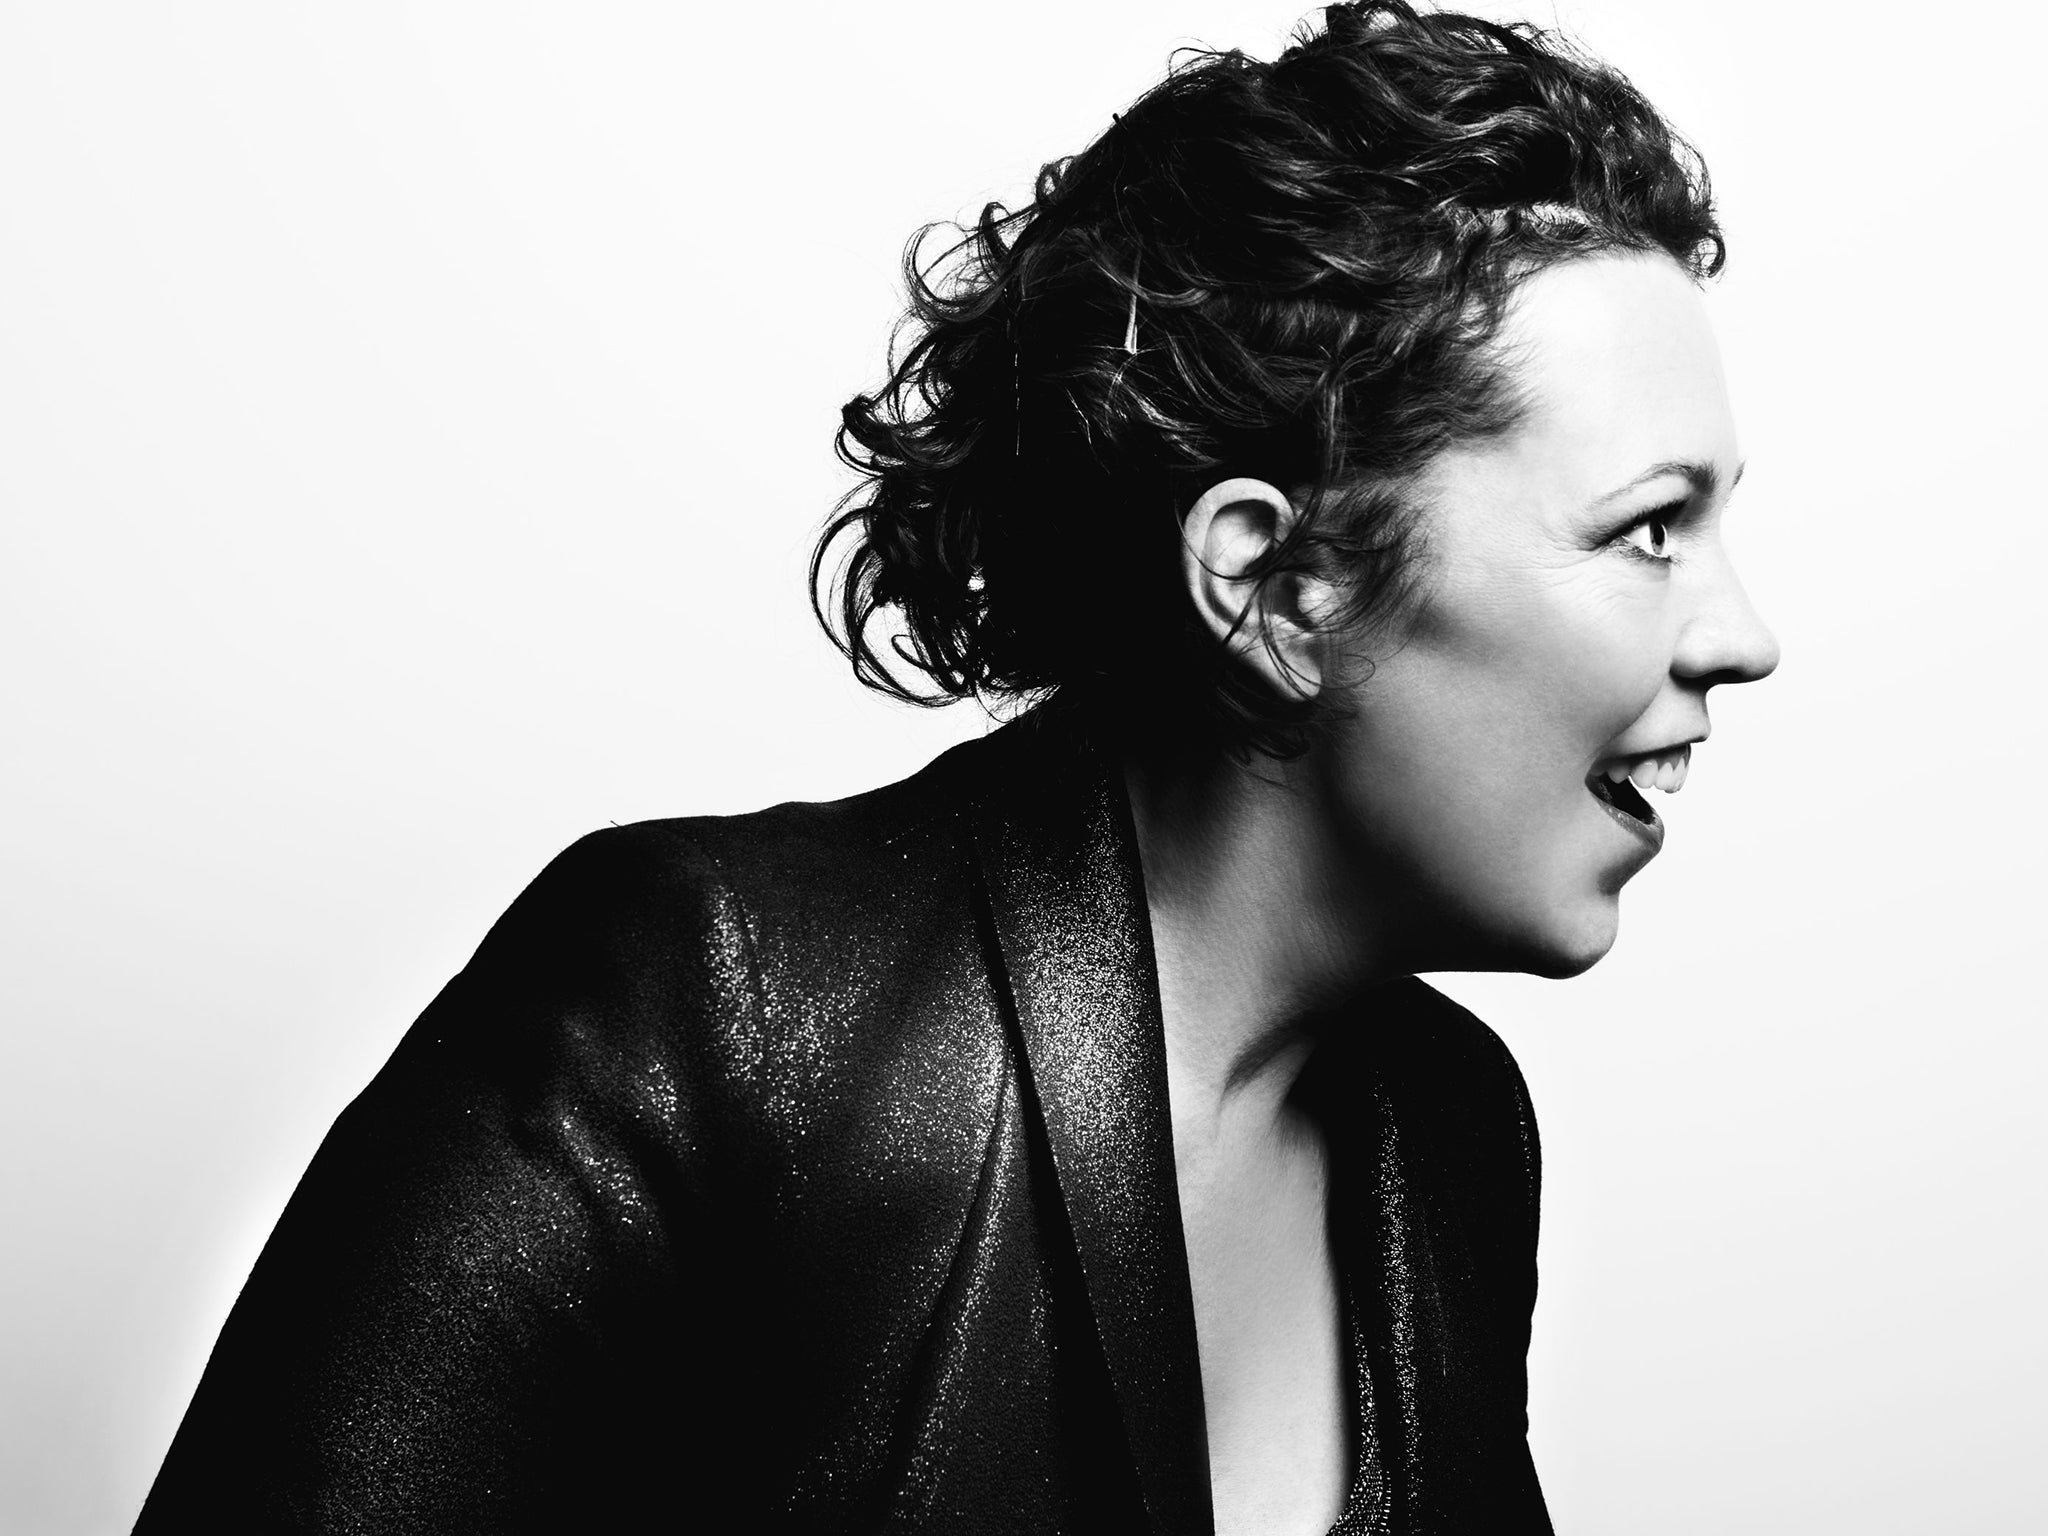 Idil Sukan shot Olivia Colman backstage at the British Independent Film Awards in 2013